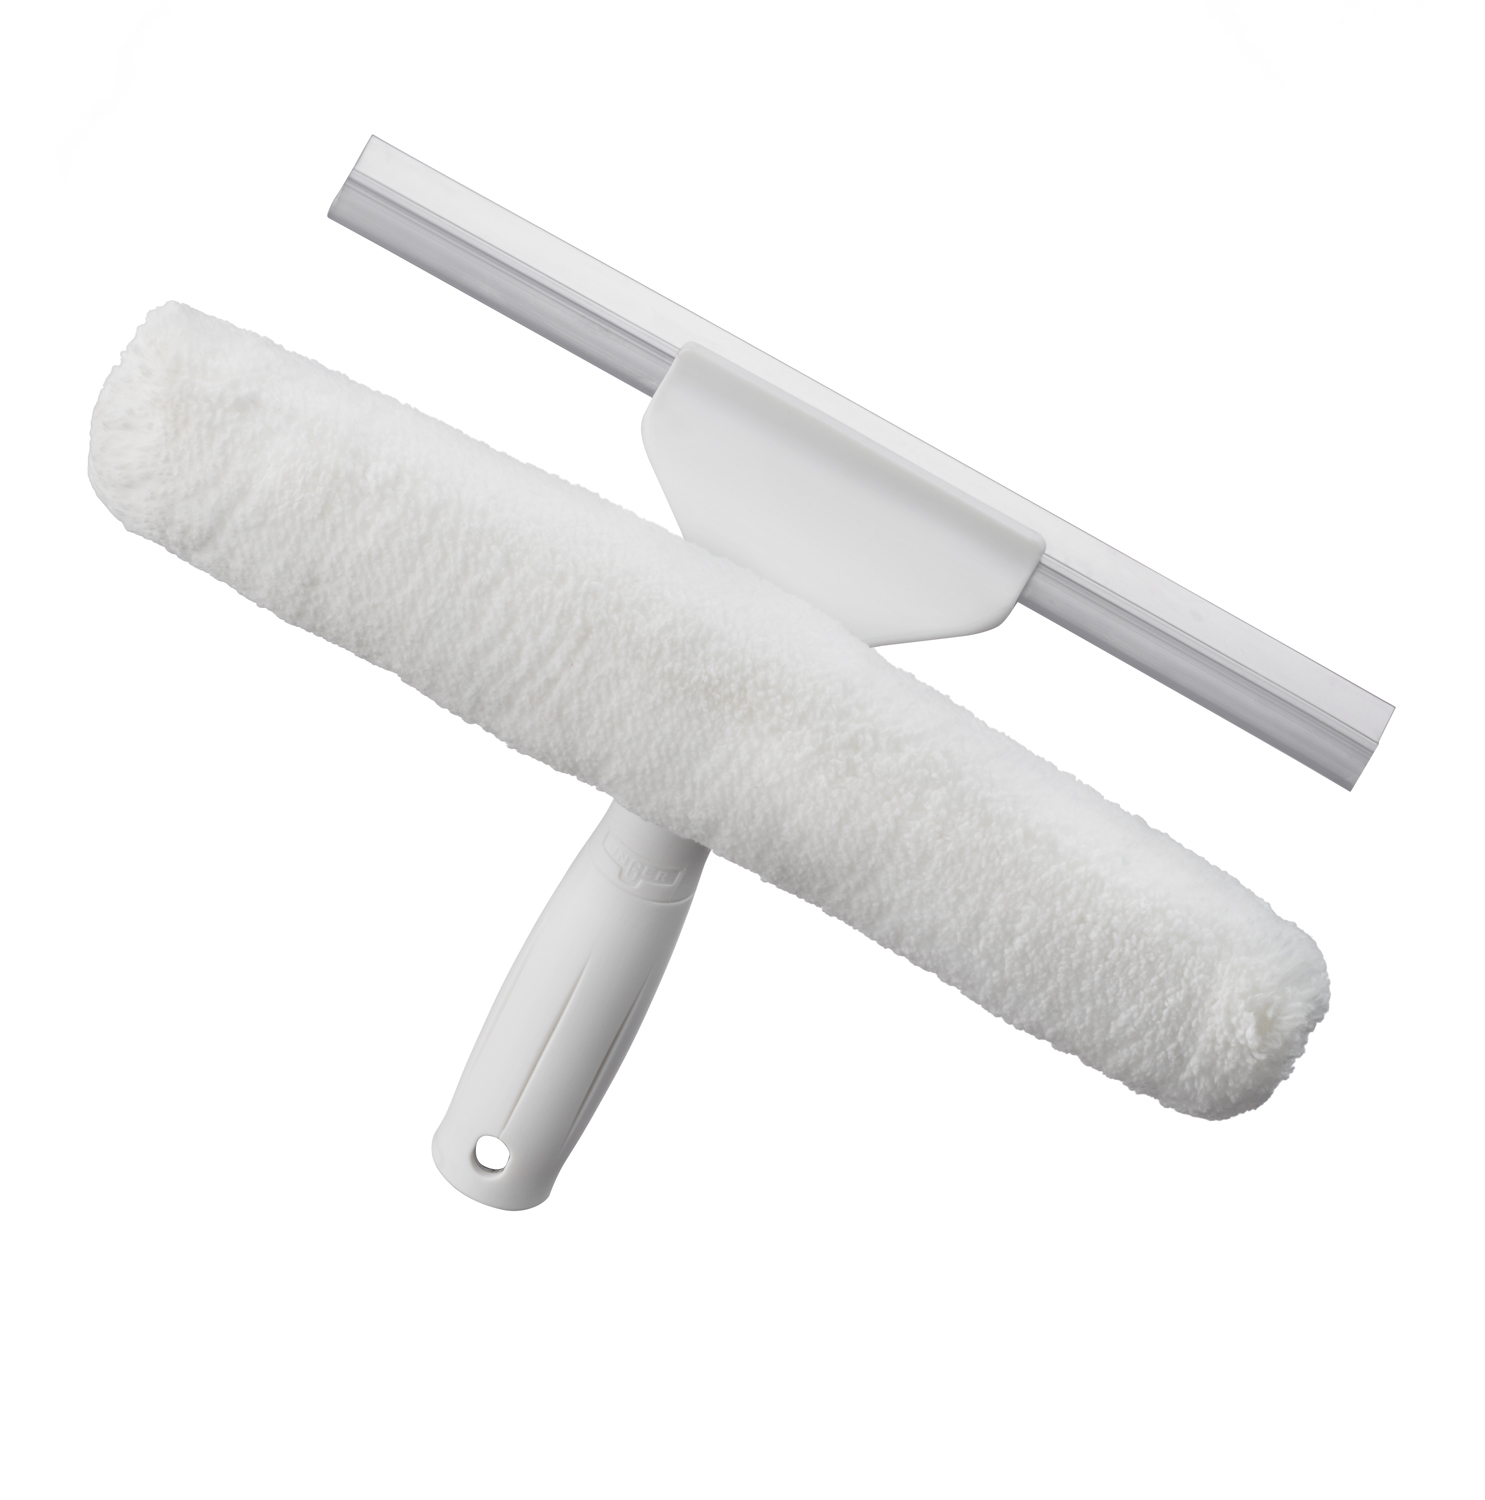 Unger 978190 Window Scrubber And Squeegee 10 Inch This